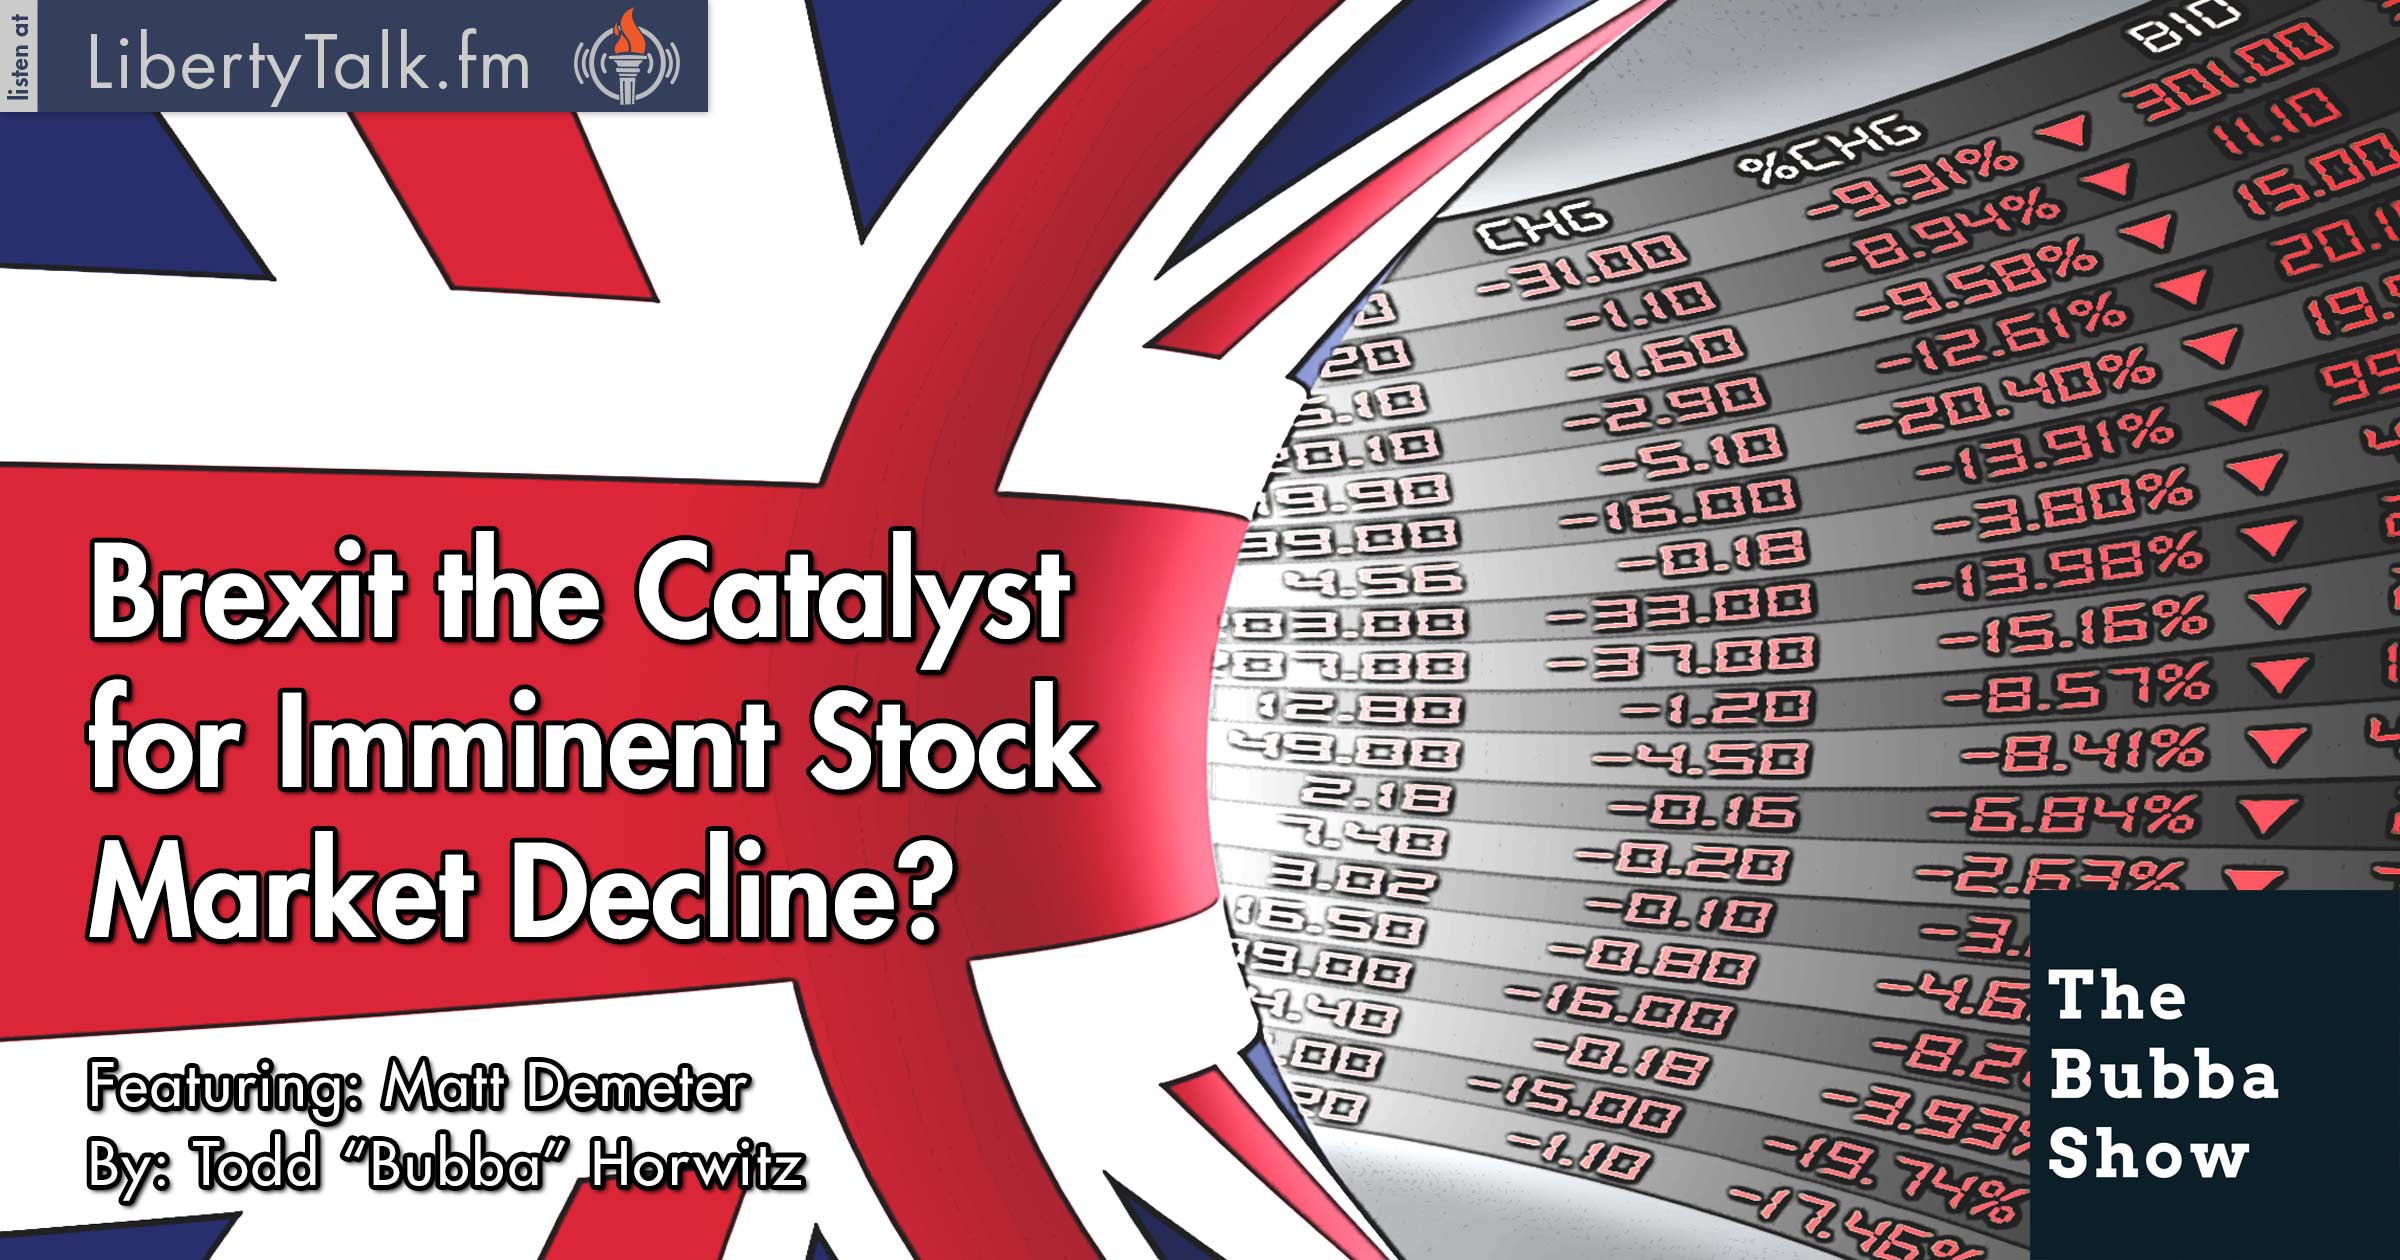 Brexit the Catalyst for Imminent Stock Market Decline? - The Bubba Show